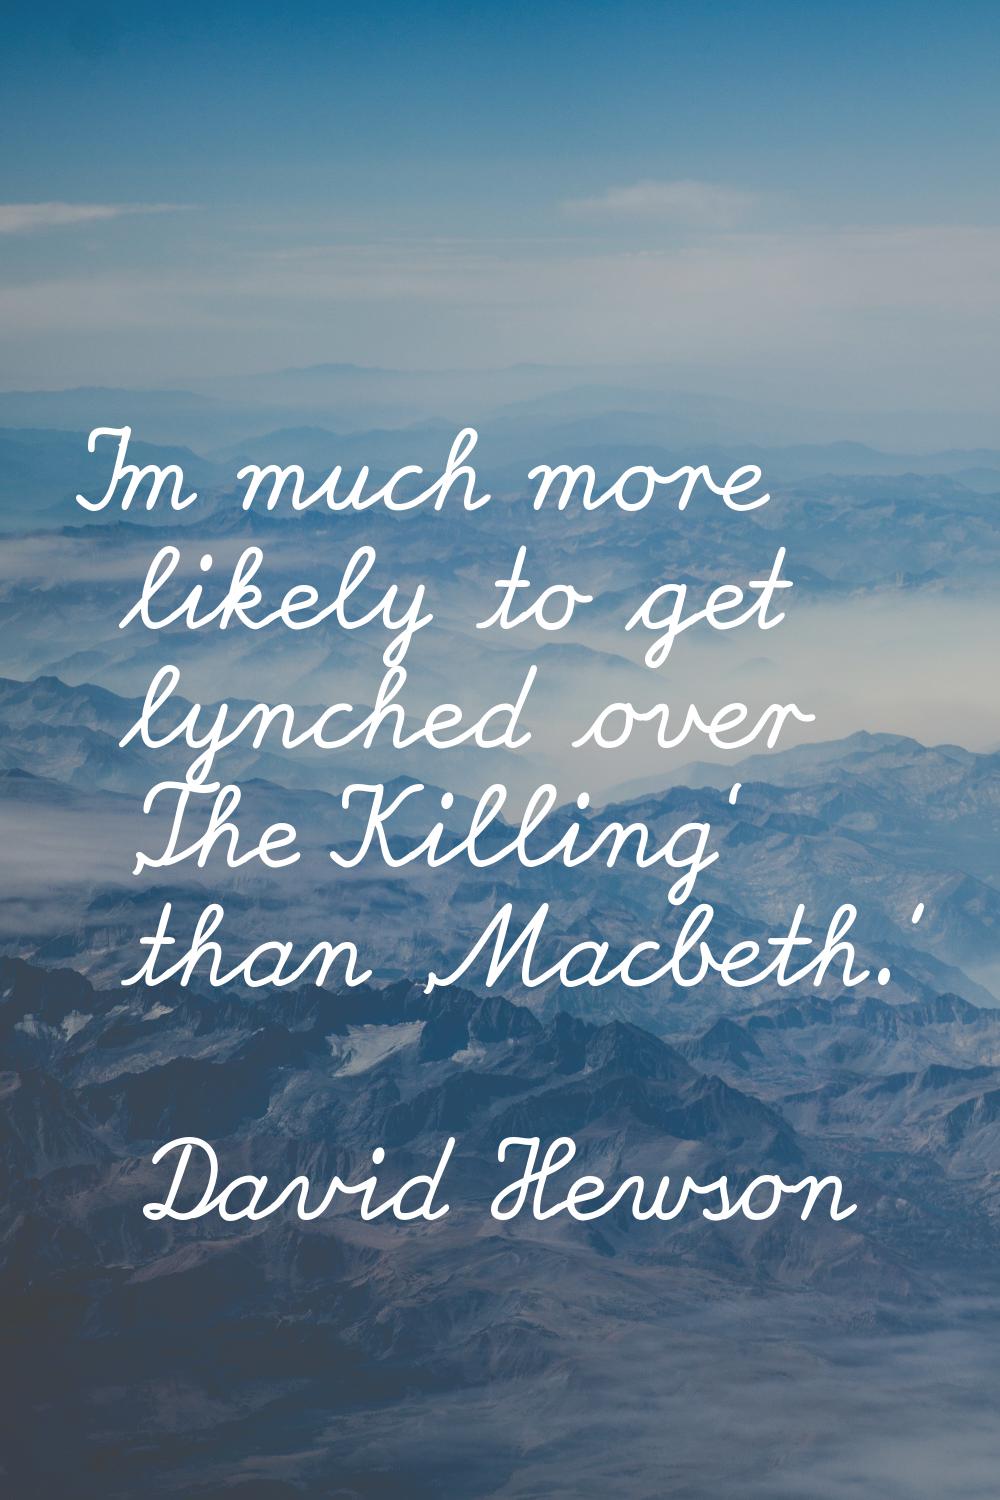 I'm much more likely to get lynched over 'The Killing' than 'Macbeth.'